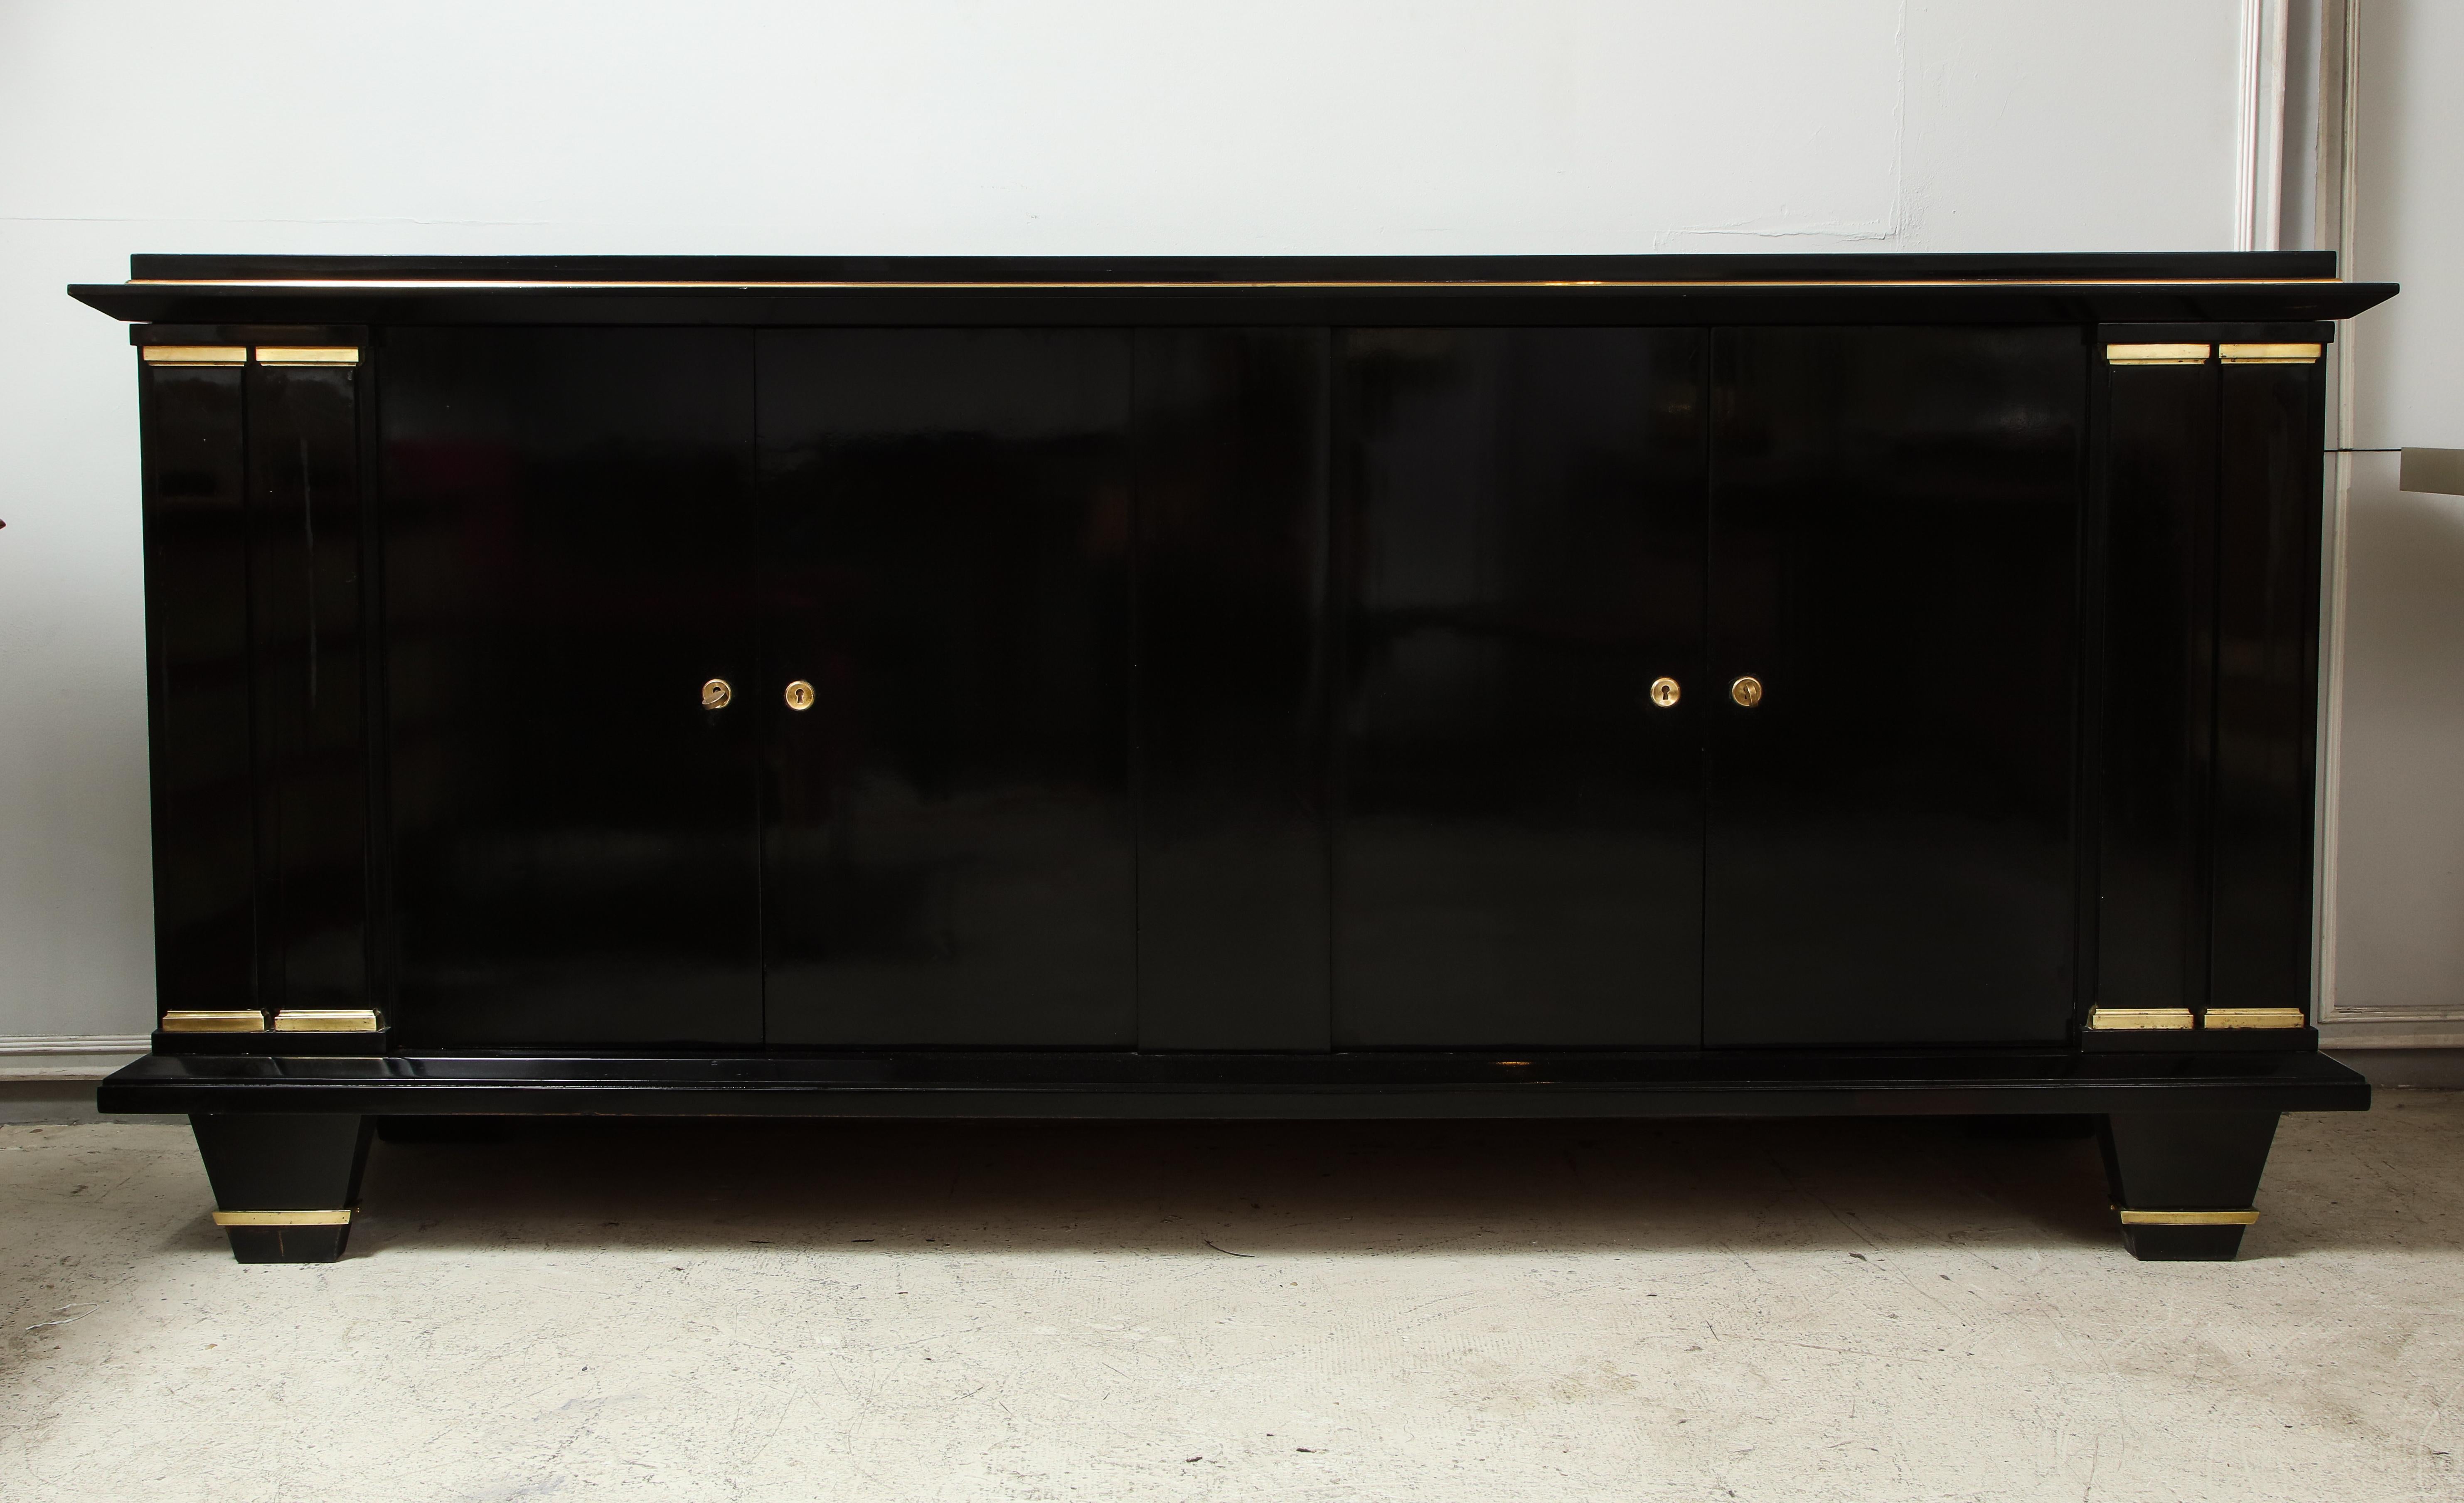 Ebonized architectural sideboard with bronze mounts having pilaster decoration with bronze capitals resting on tapered legs.